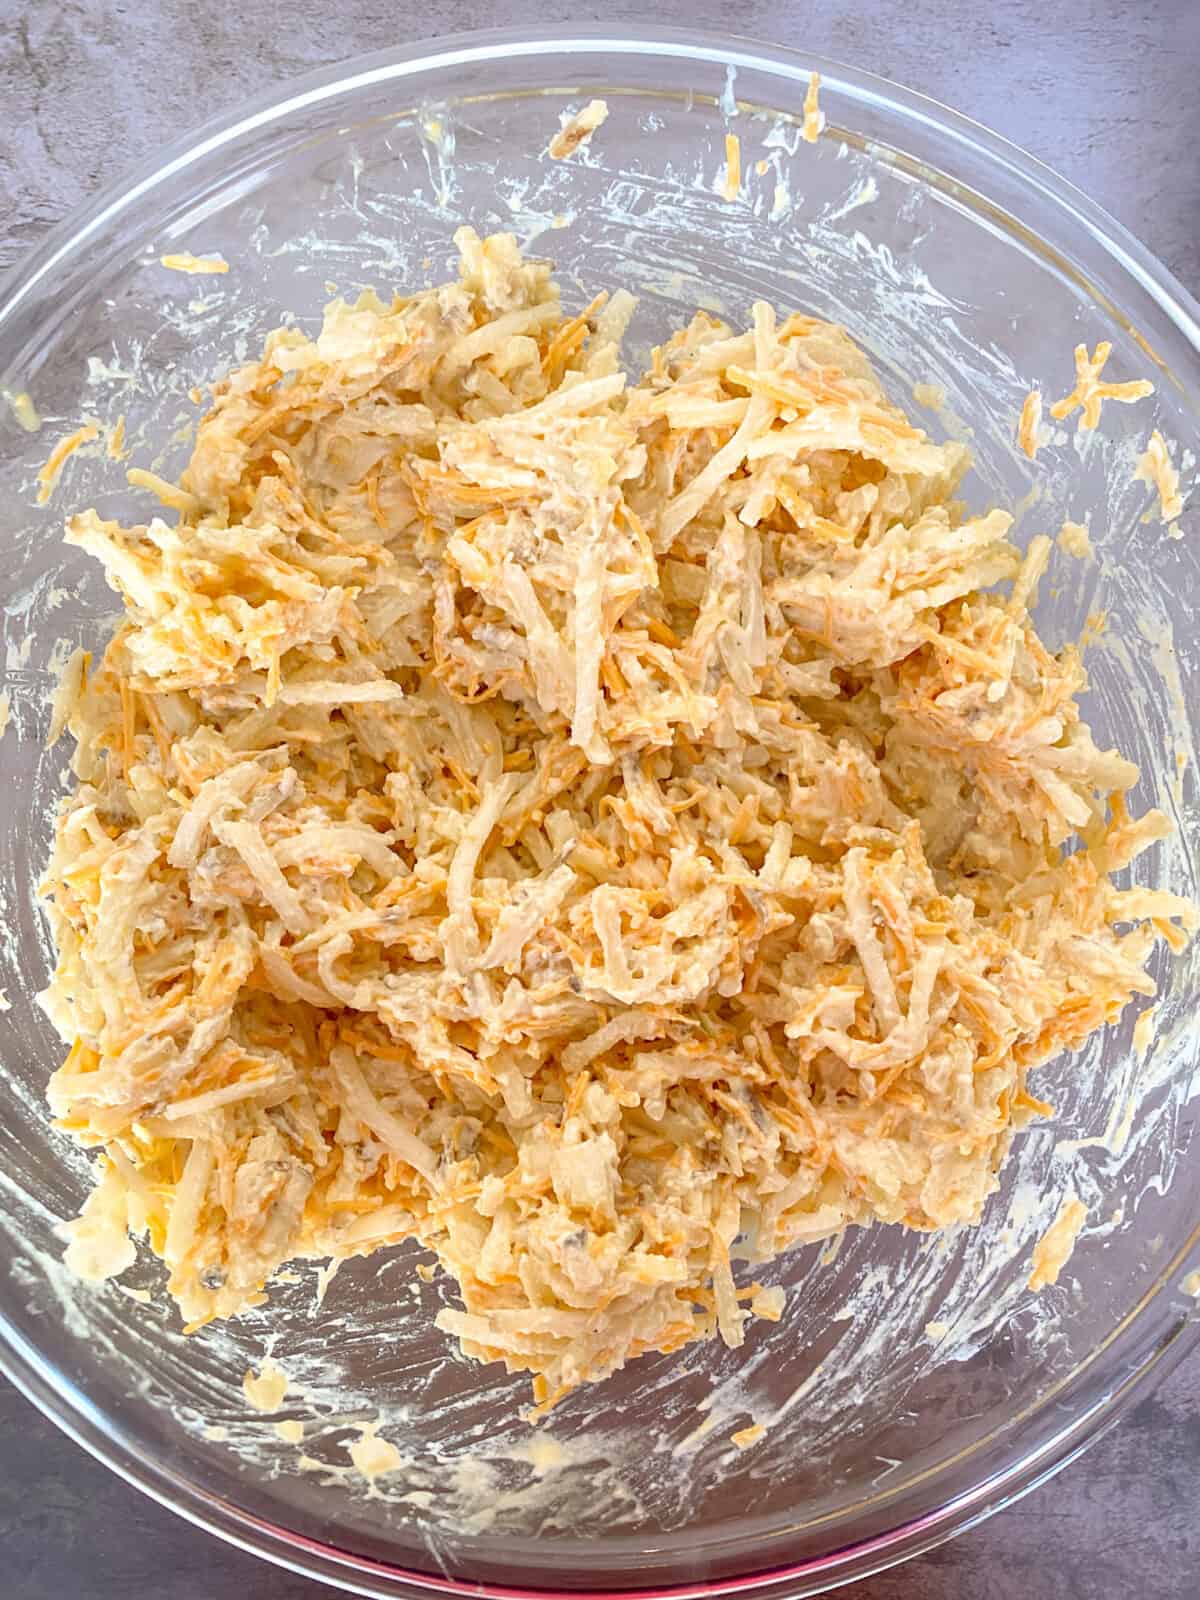 hash brown casserole ingredients mixed together in a bowl